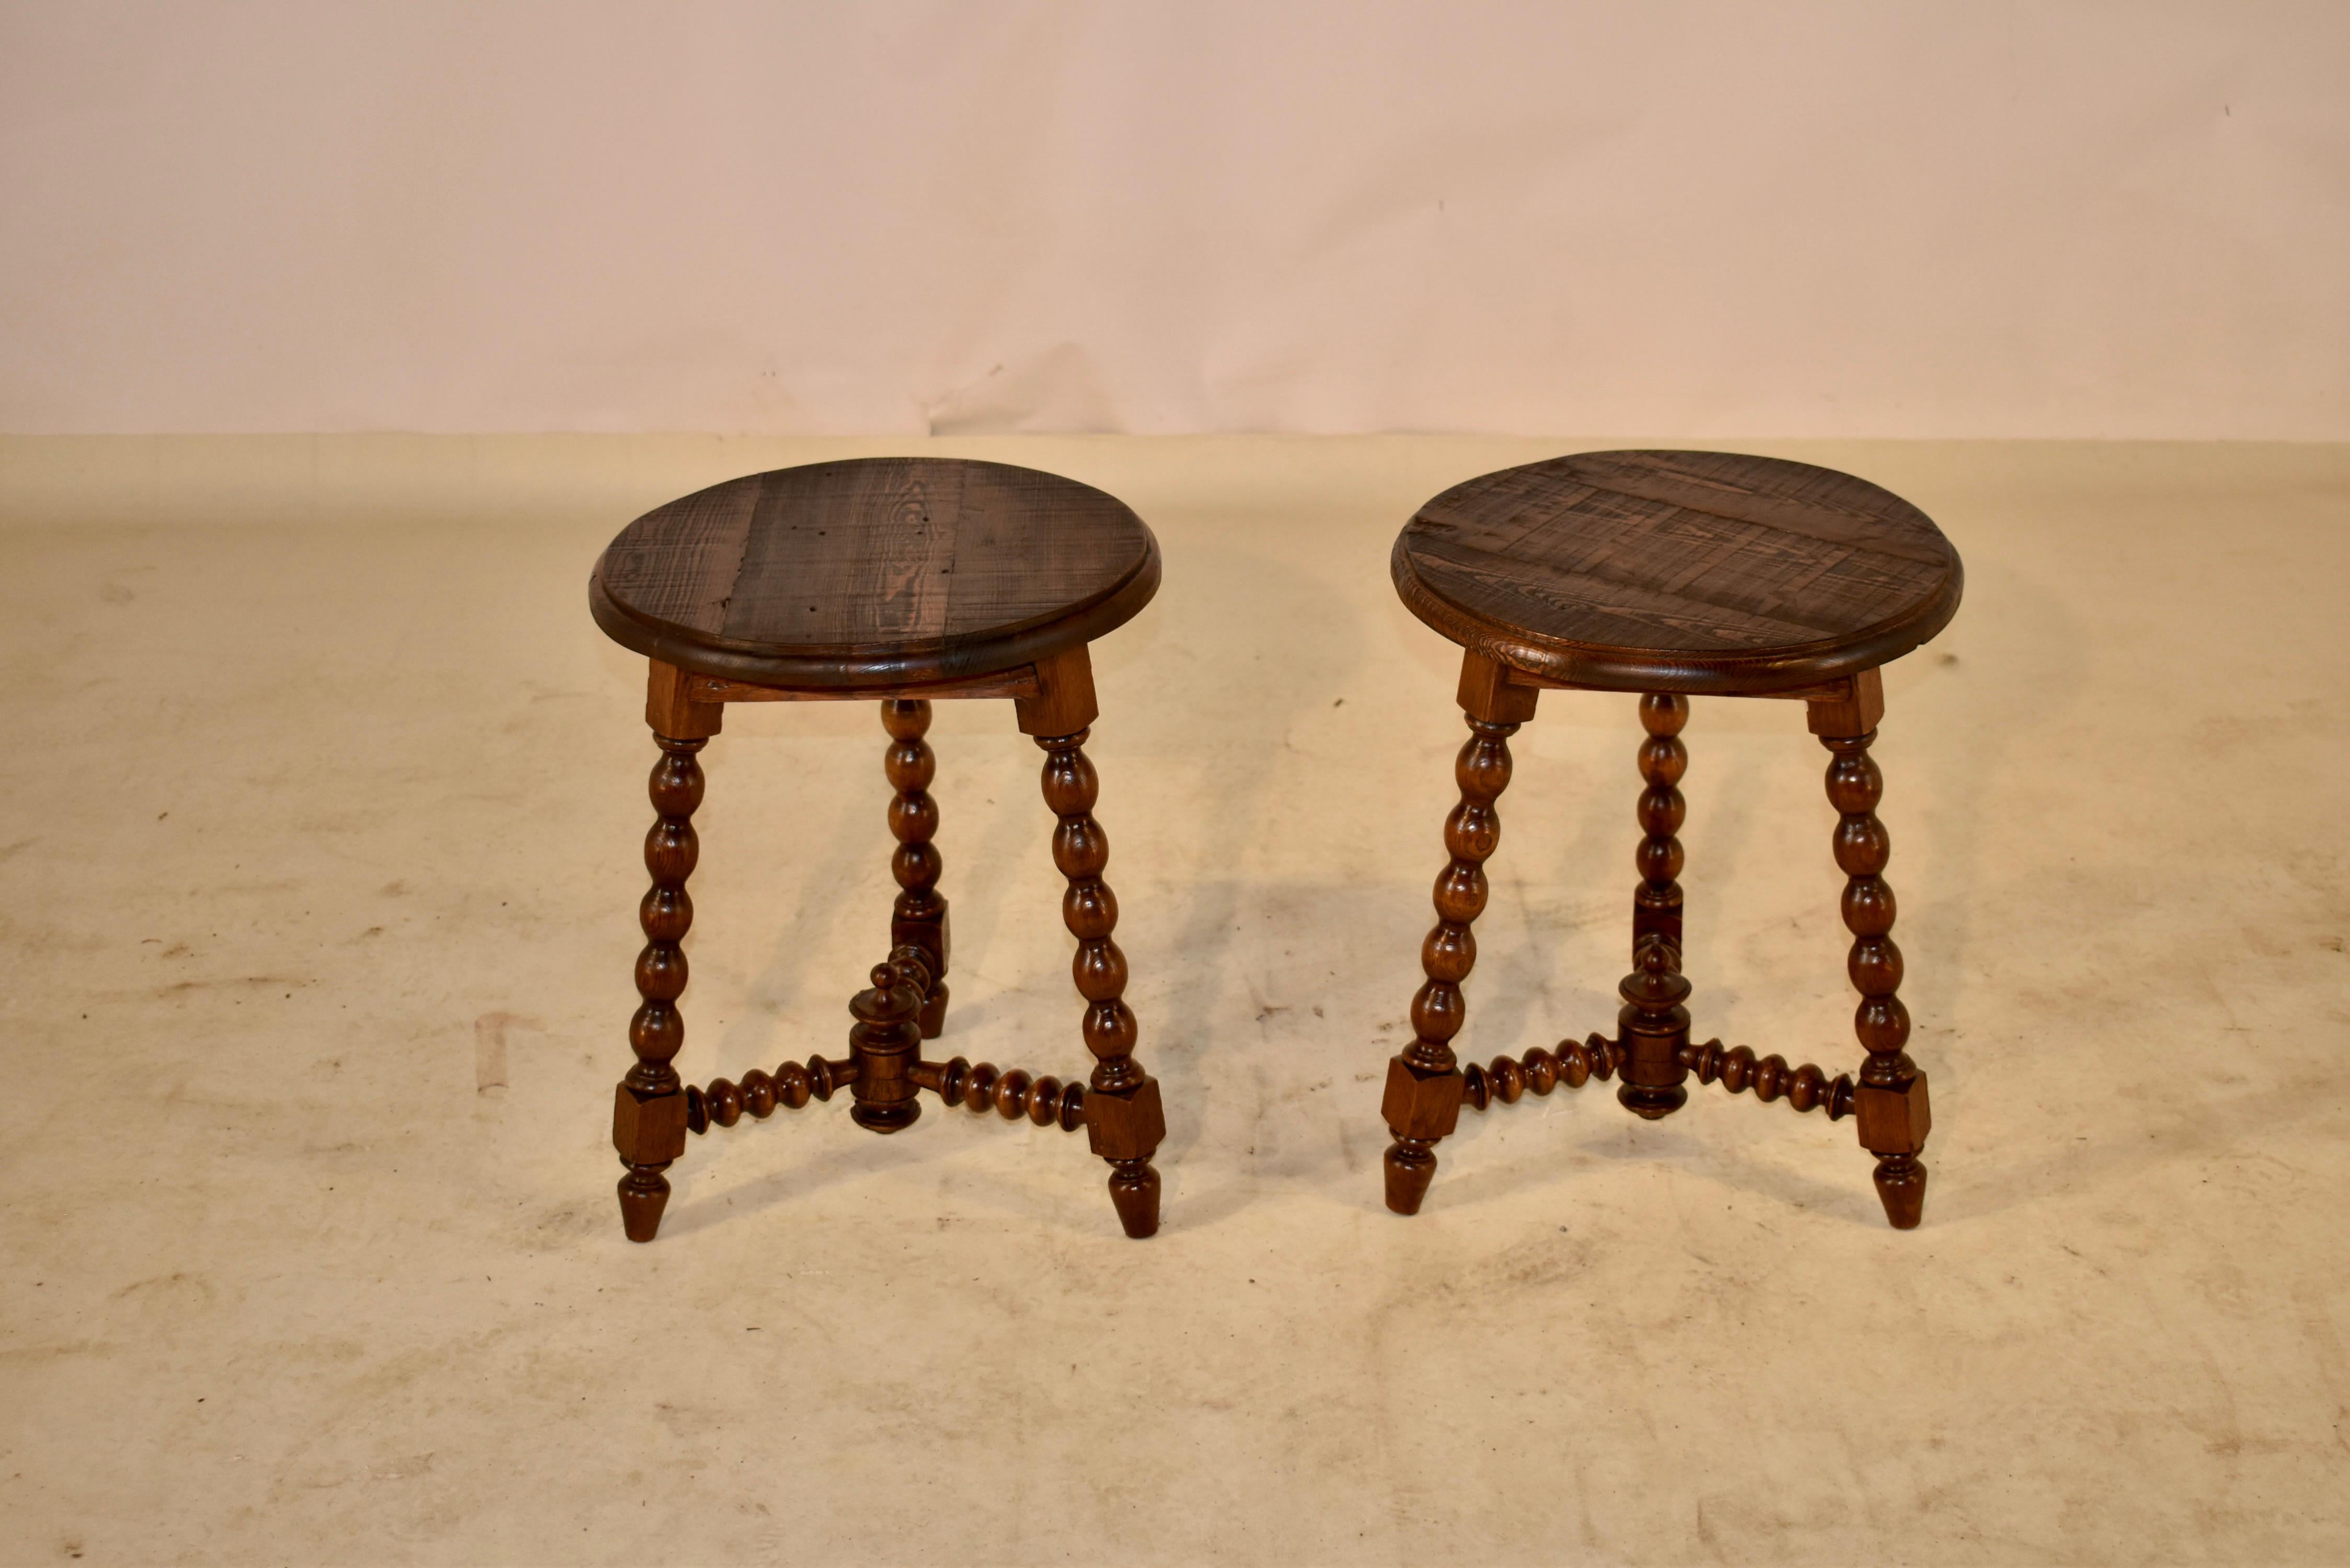 Pair of 19th century French oak stools with pitch pine seats. The seats have routed edges and are resting upon oak bases with simple aprons and splayed, hand turned legs in a bobbin pattern. The legs are joined by complementing hand turned